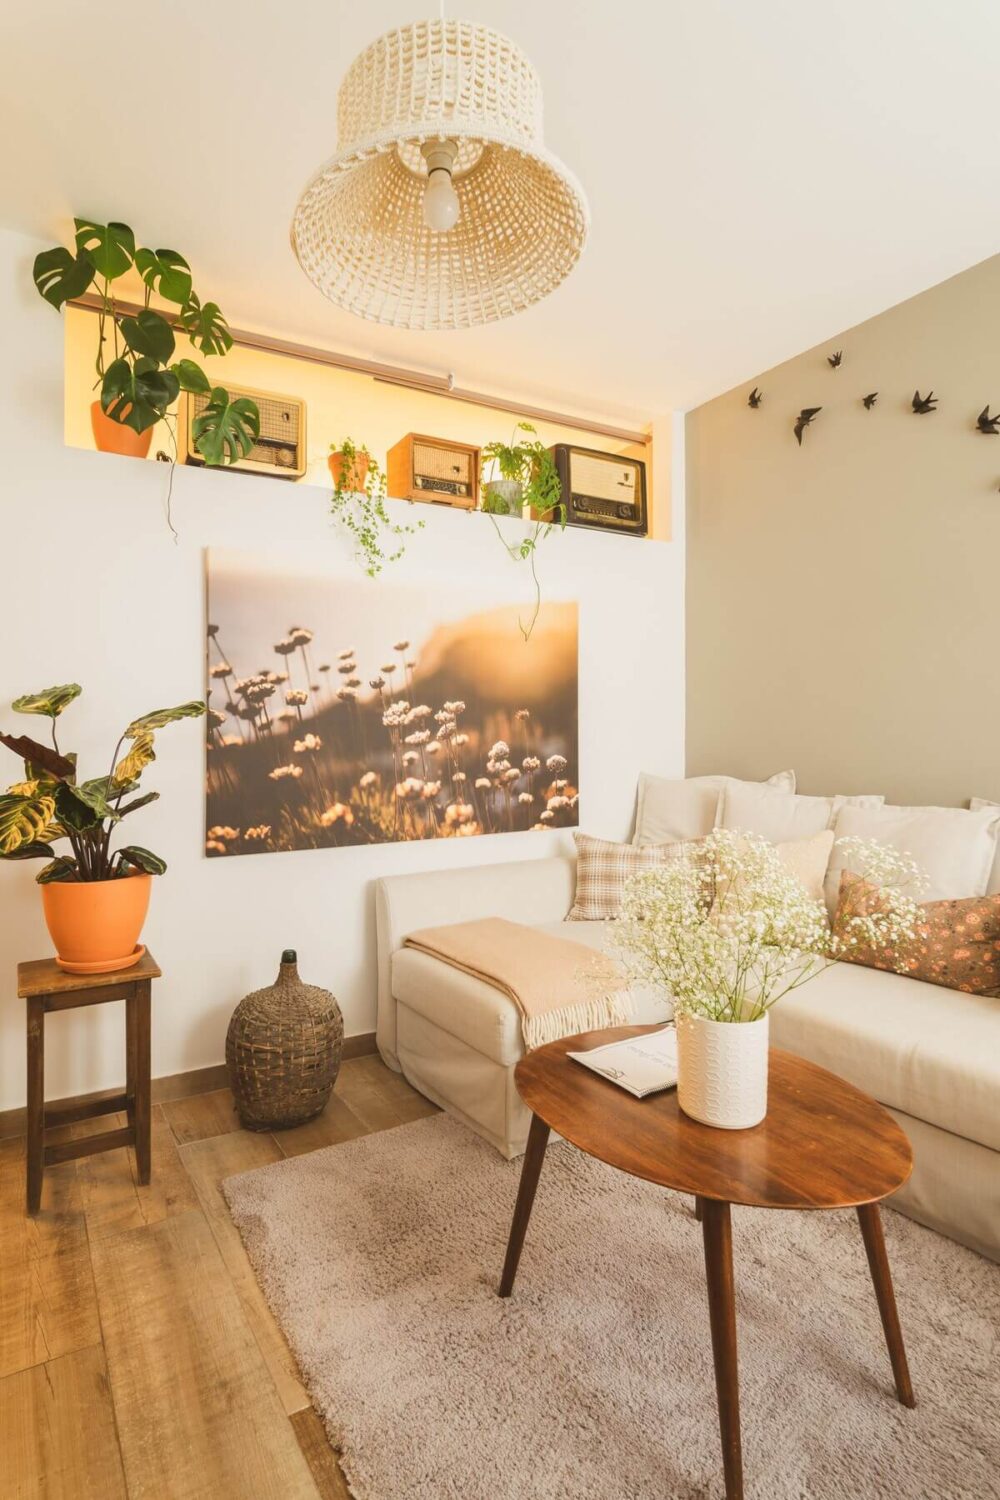 airbnb-lagos-portugal-small-serene-sitting-room-nordroom